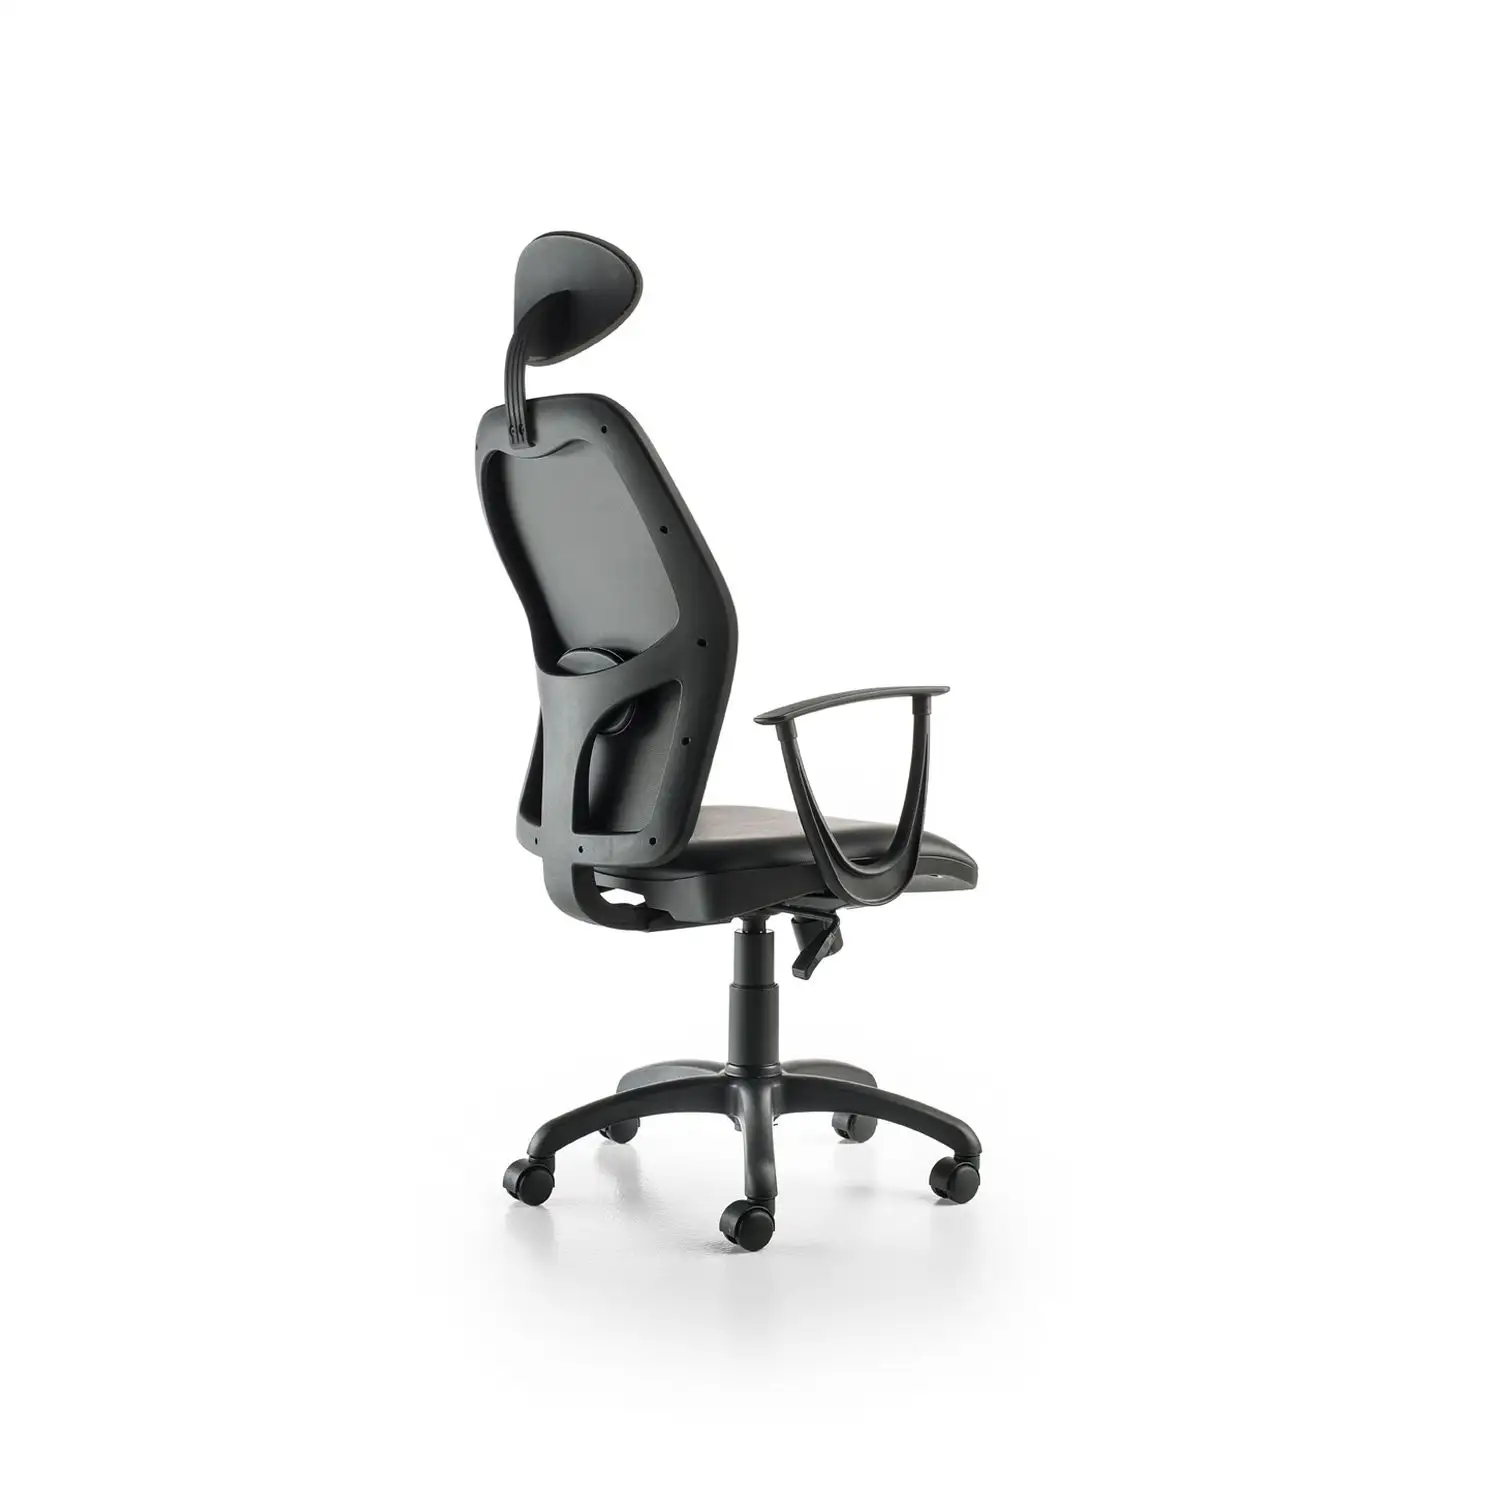 Globo Operative Chair - Professional Elegance with Robust Design - Tailored for the Modern Office